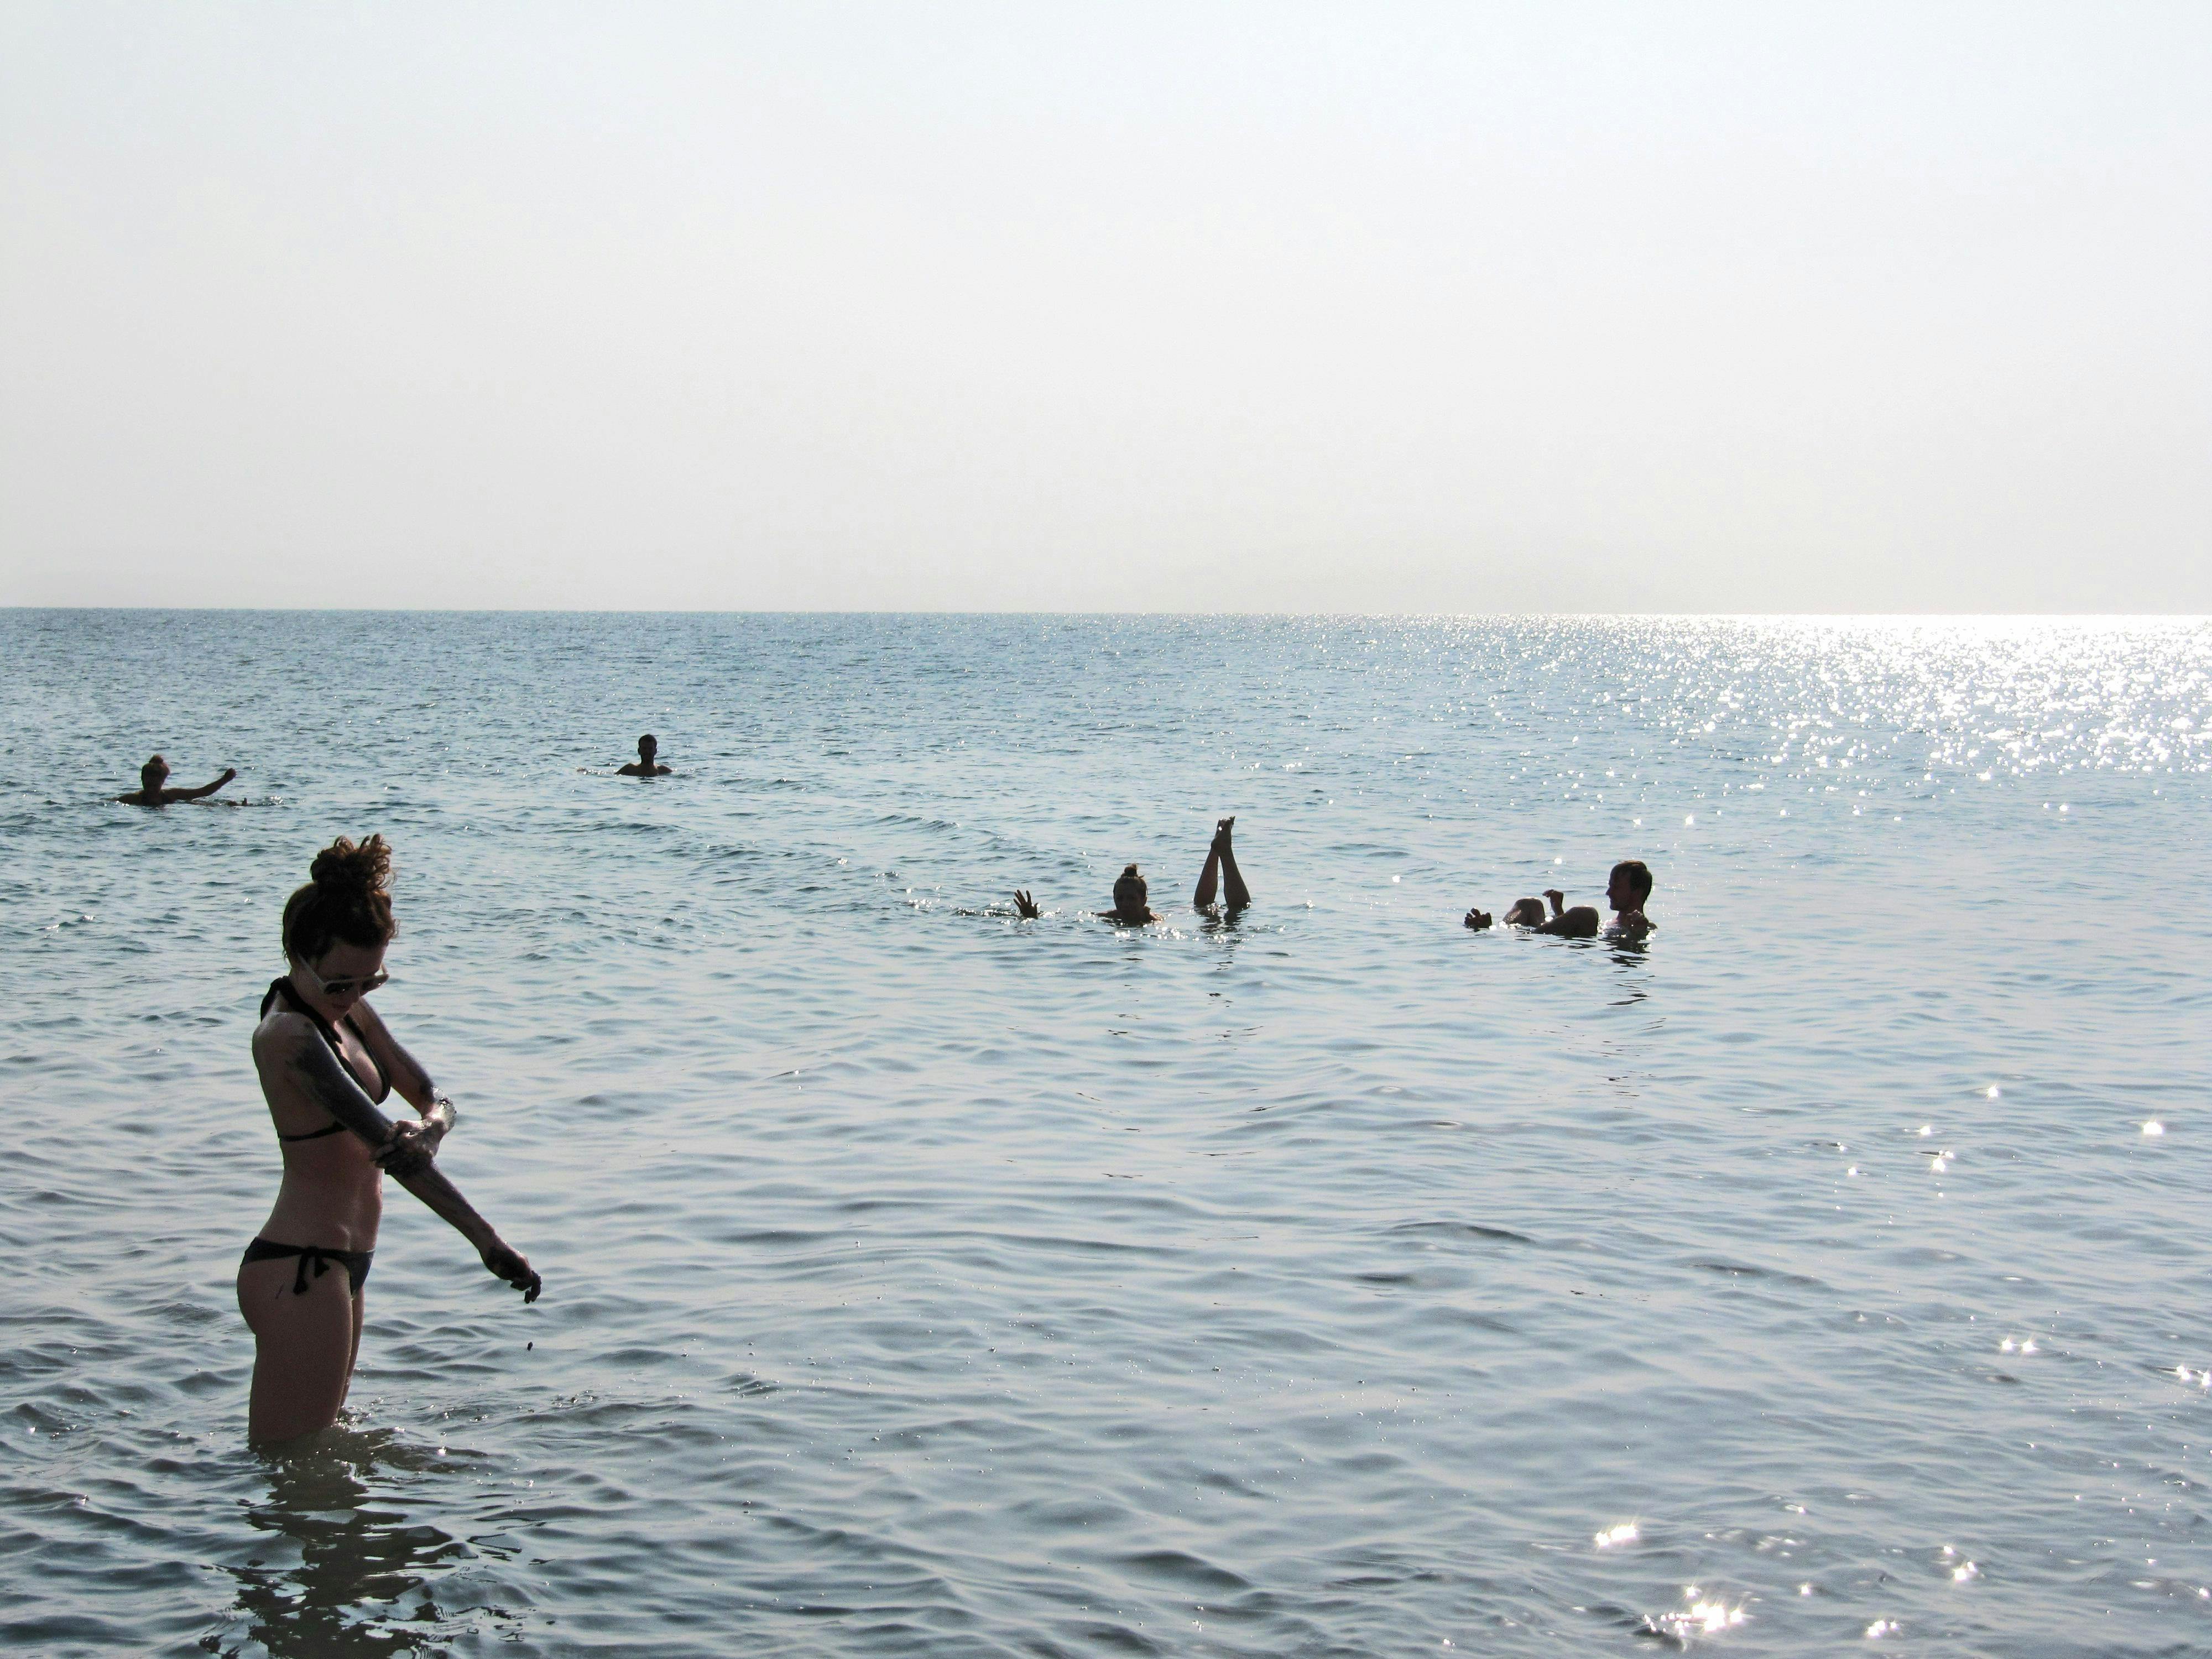 Dead Sea self-guided tour from Jerusalem